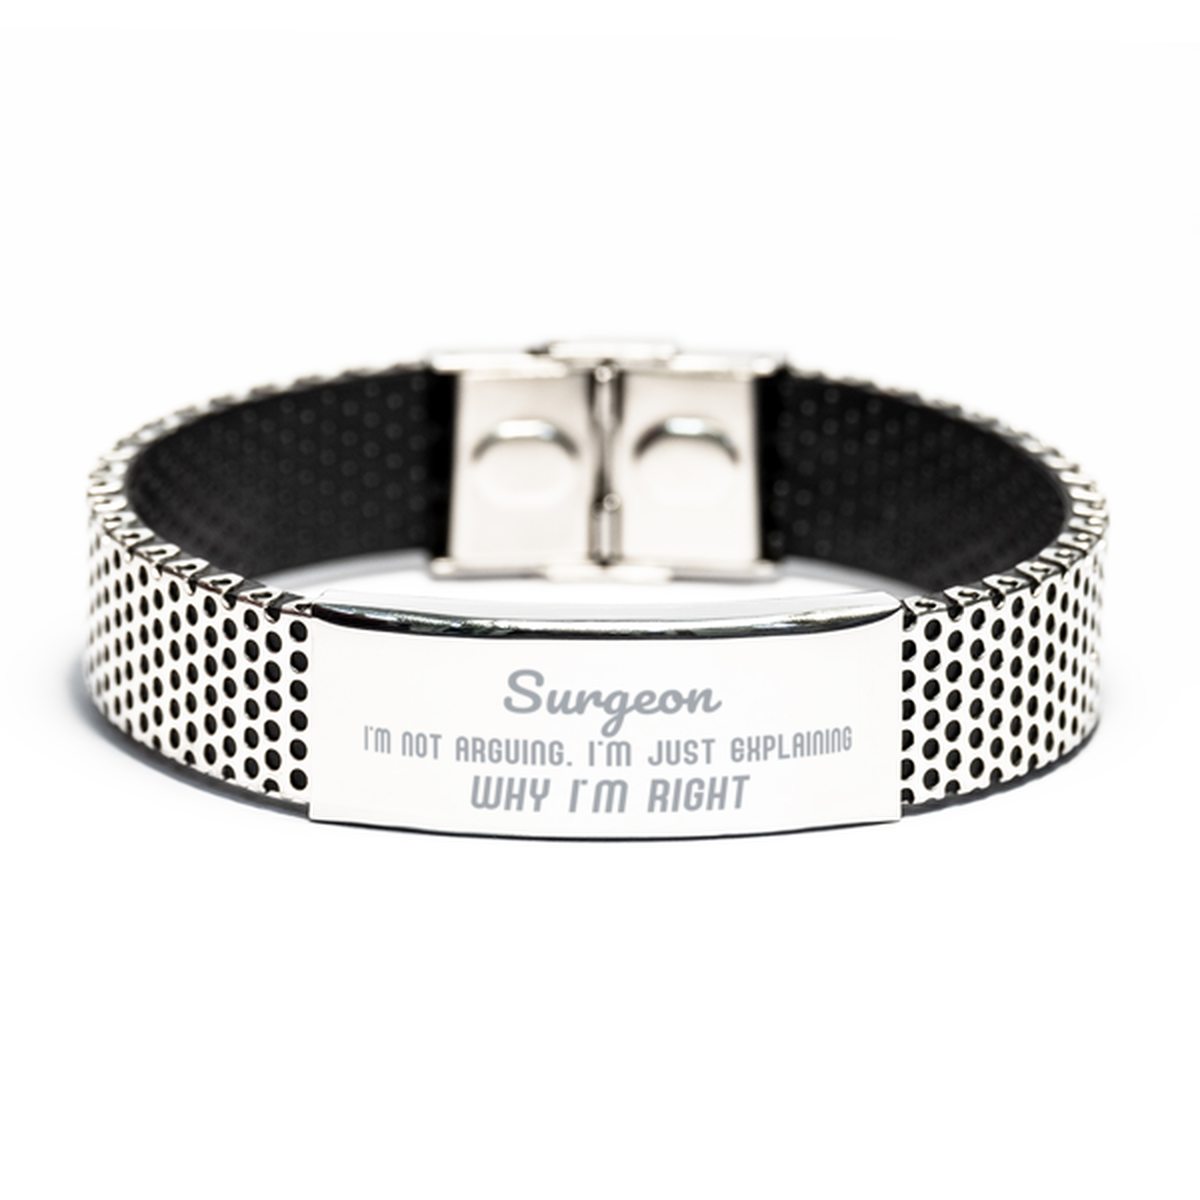 Surgeon I'm not Arguing. I'm Just Explaining Why I'm RIGHT Stainless Steel Bracelet, Funny Saying Quote Surgeon Gifts For Surgeon Graduation Birthday Christmas Gifts for Men Women Coworker